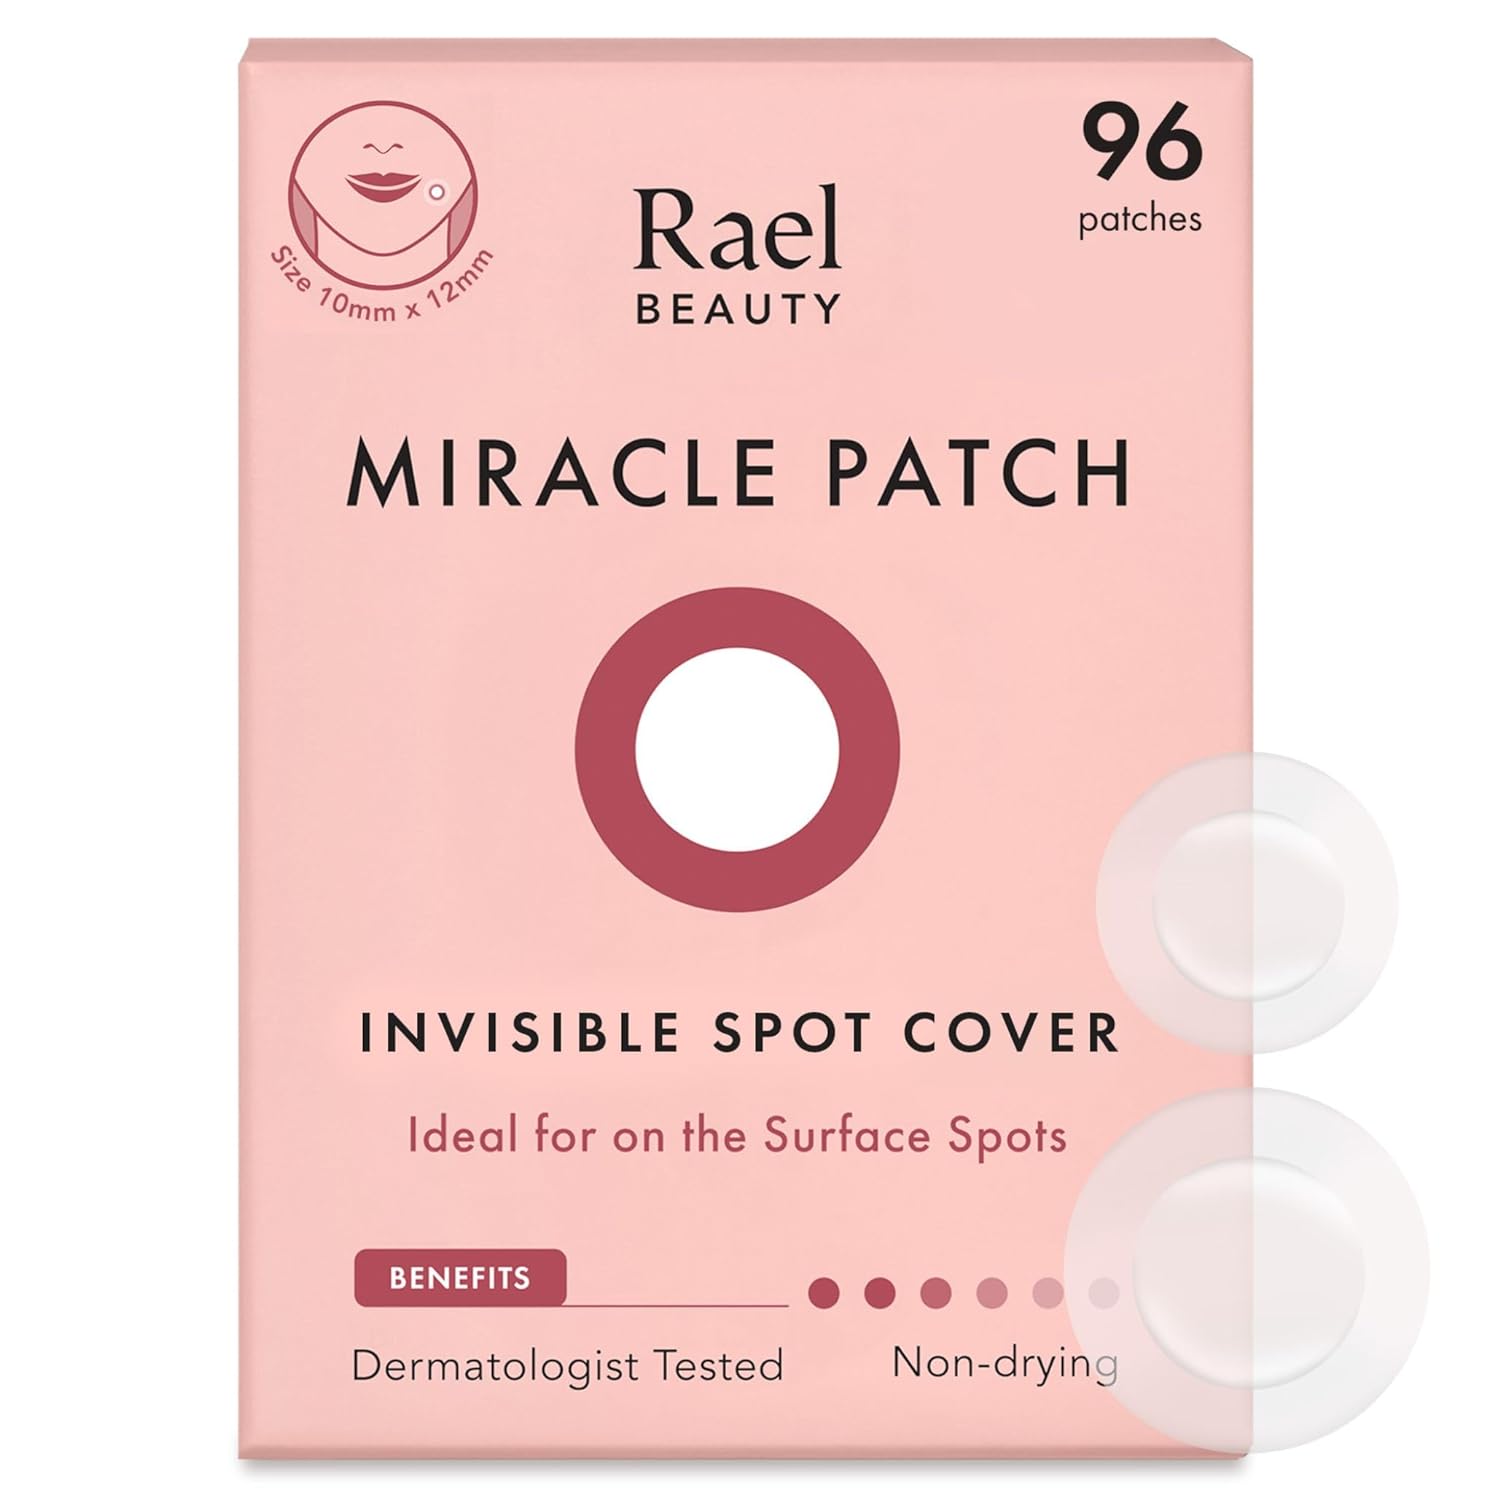 Rael Pimple Patches, Miracle Invisible Spot Cover - Hydrocolloid Acne Patch for Face, Blemishes, Zits Absorbing Patch, Breakouts Spot Treatment for Skin Care, Facial Sticker, 2 Sizes (96 Count)